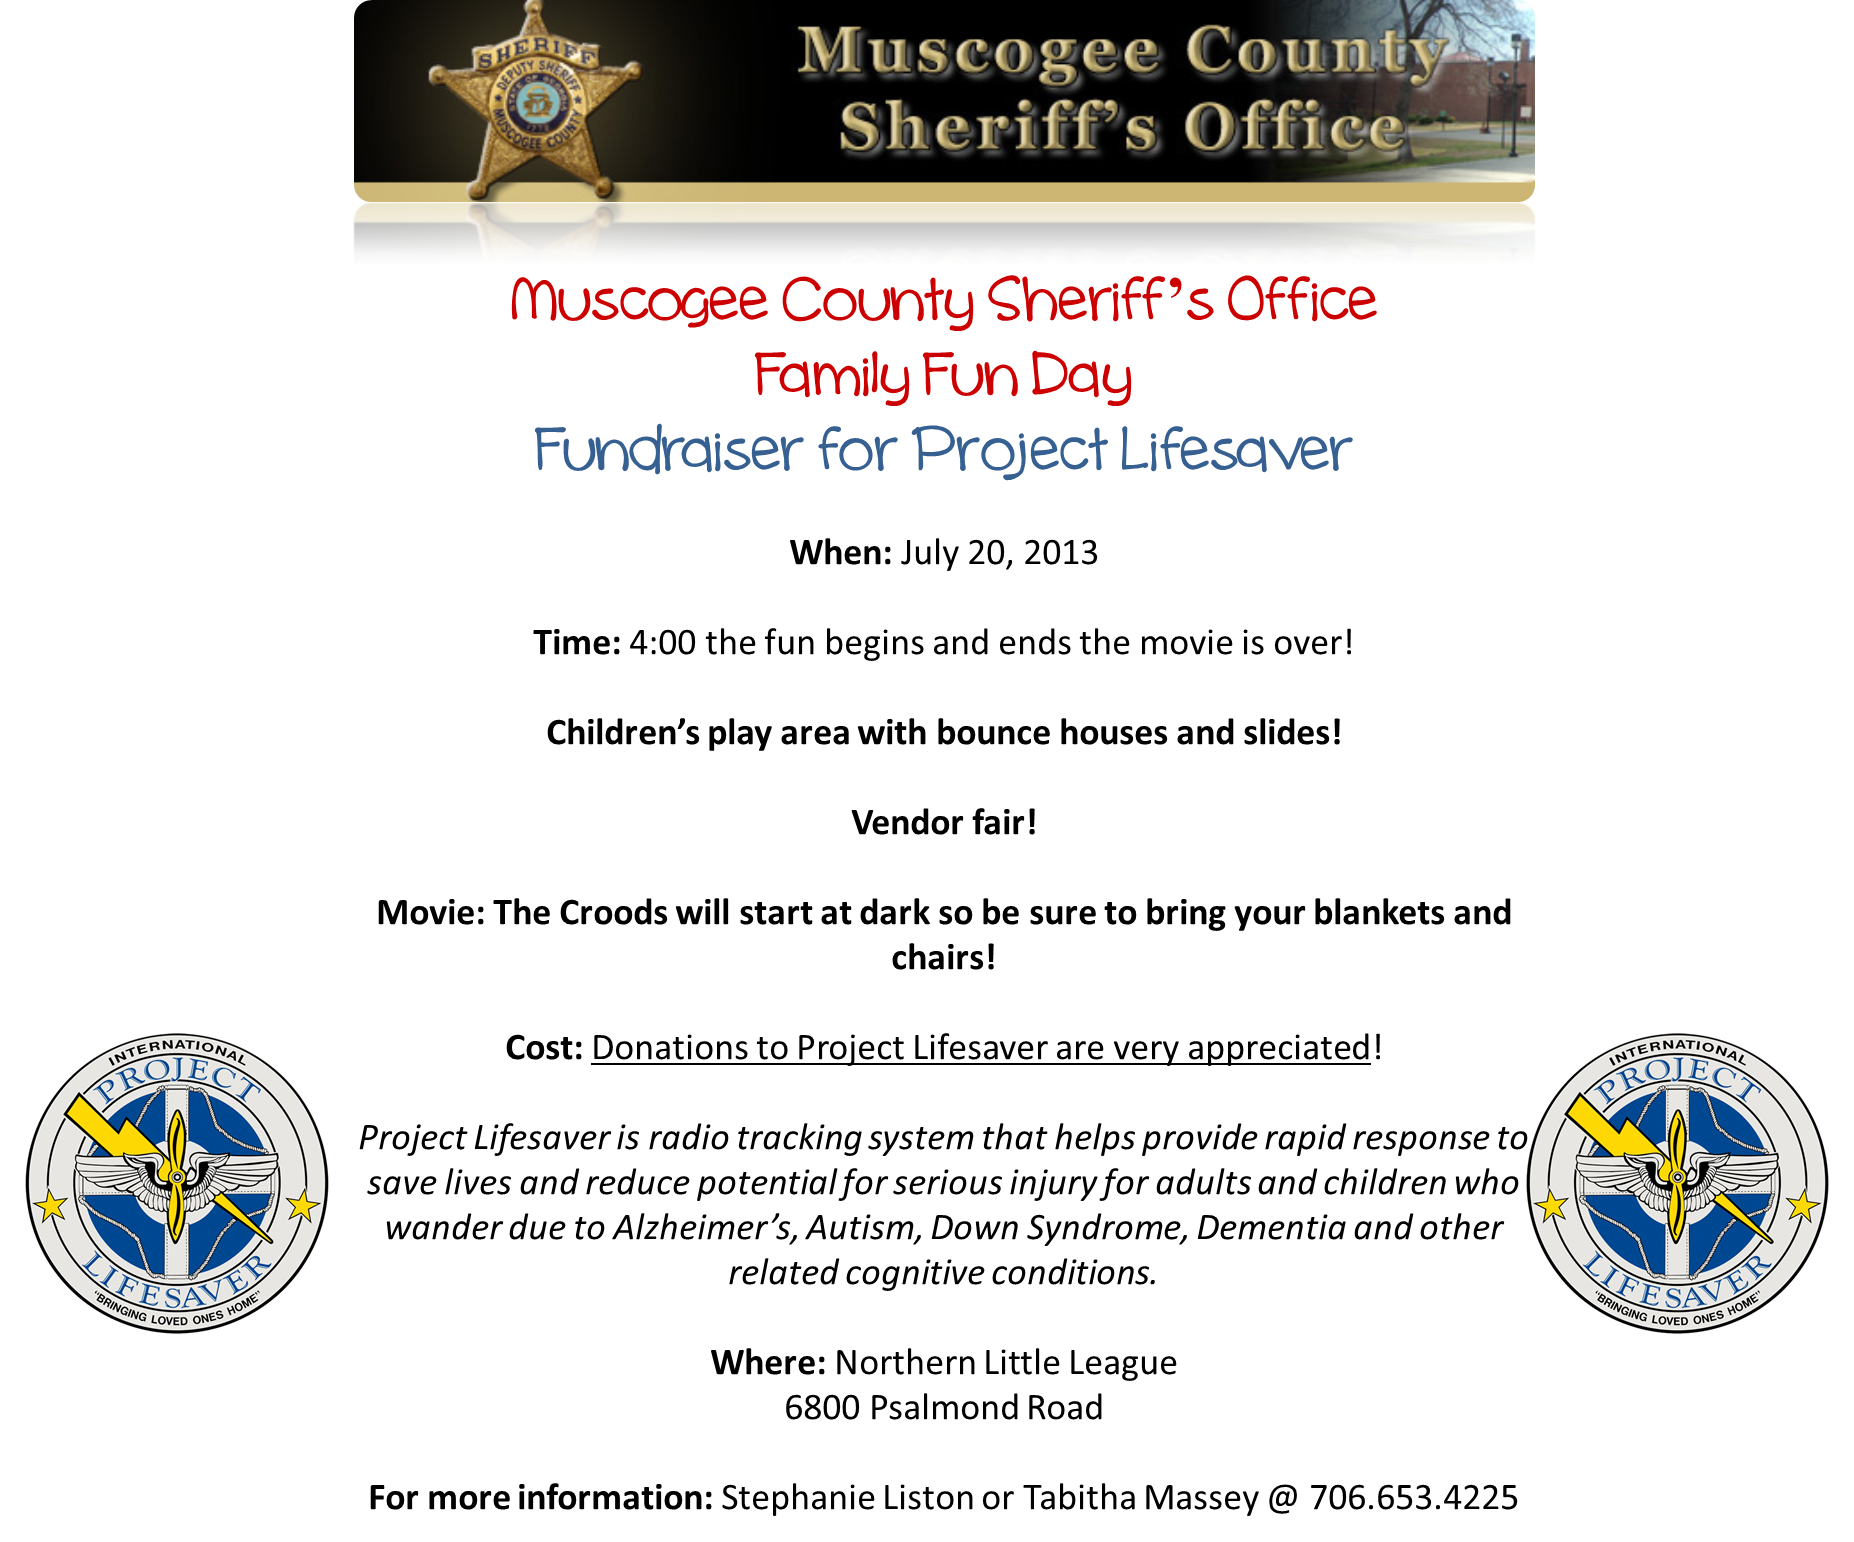 Muscogee Co. Sheriff’s Office Family Fun Day Benefiting Project Lifesaver